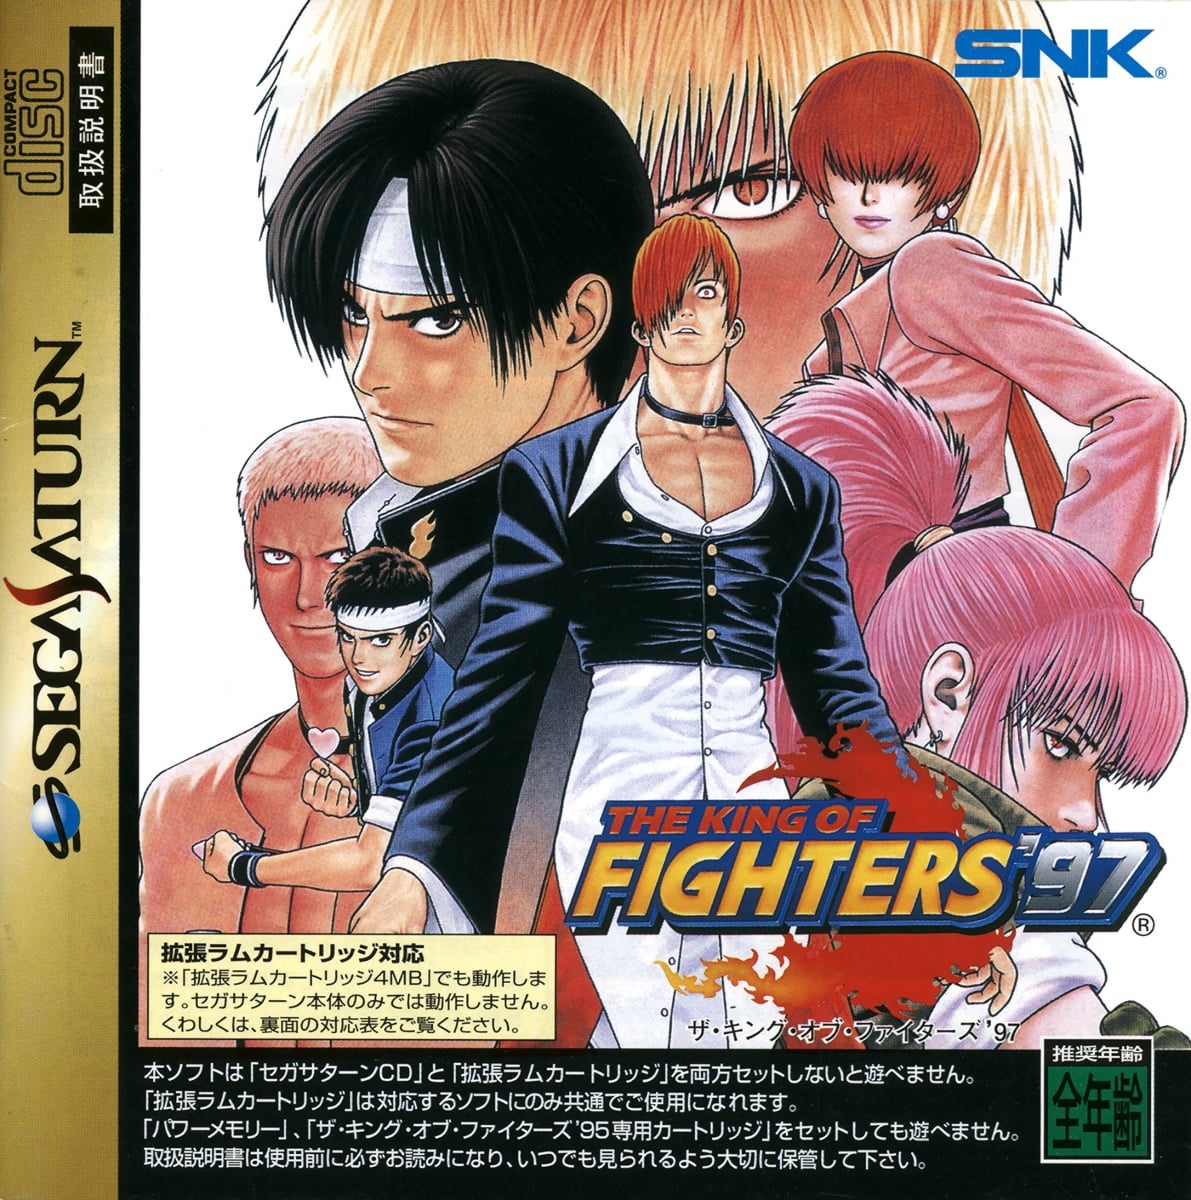 Capa do jogo The King of Fighters 97